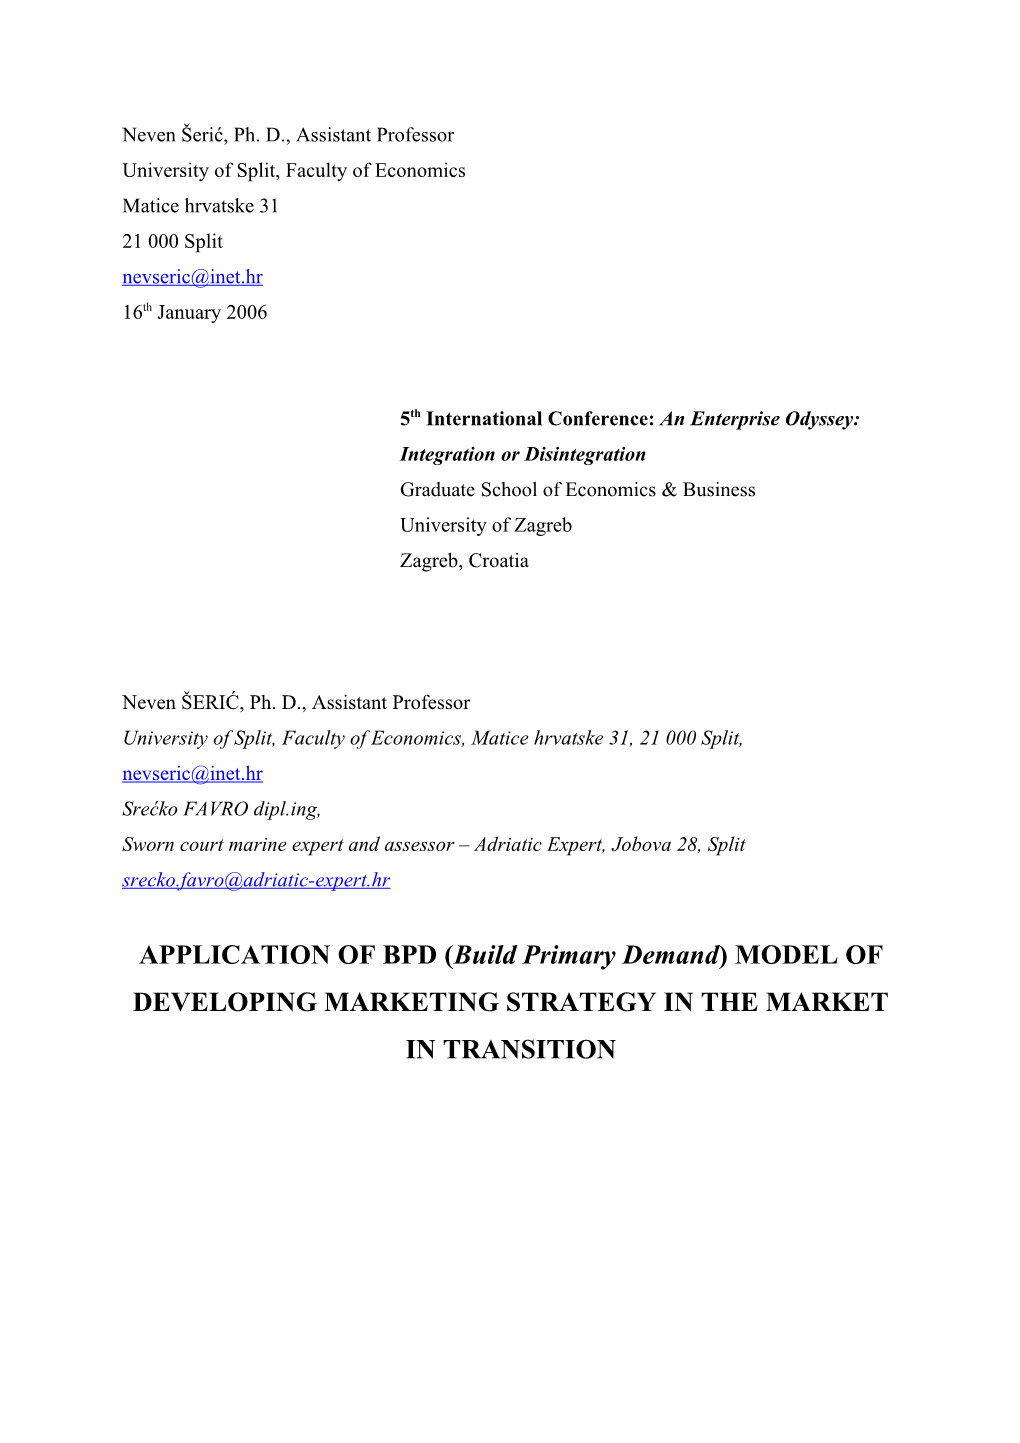 APPLICATION of BPD (Build Primary Demand) MODEL of DEVELOPING MARKETING STRATEGY on THE